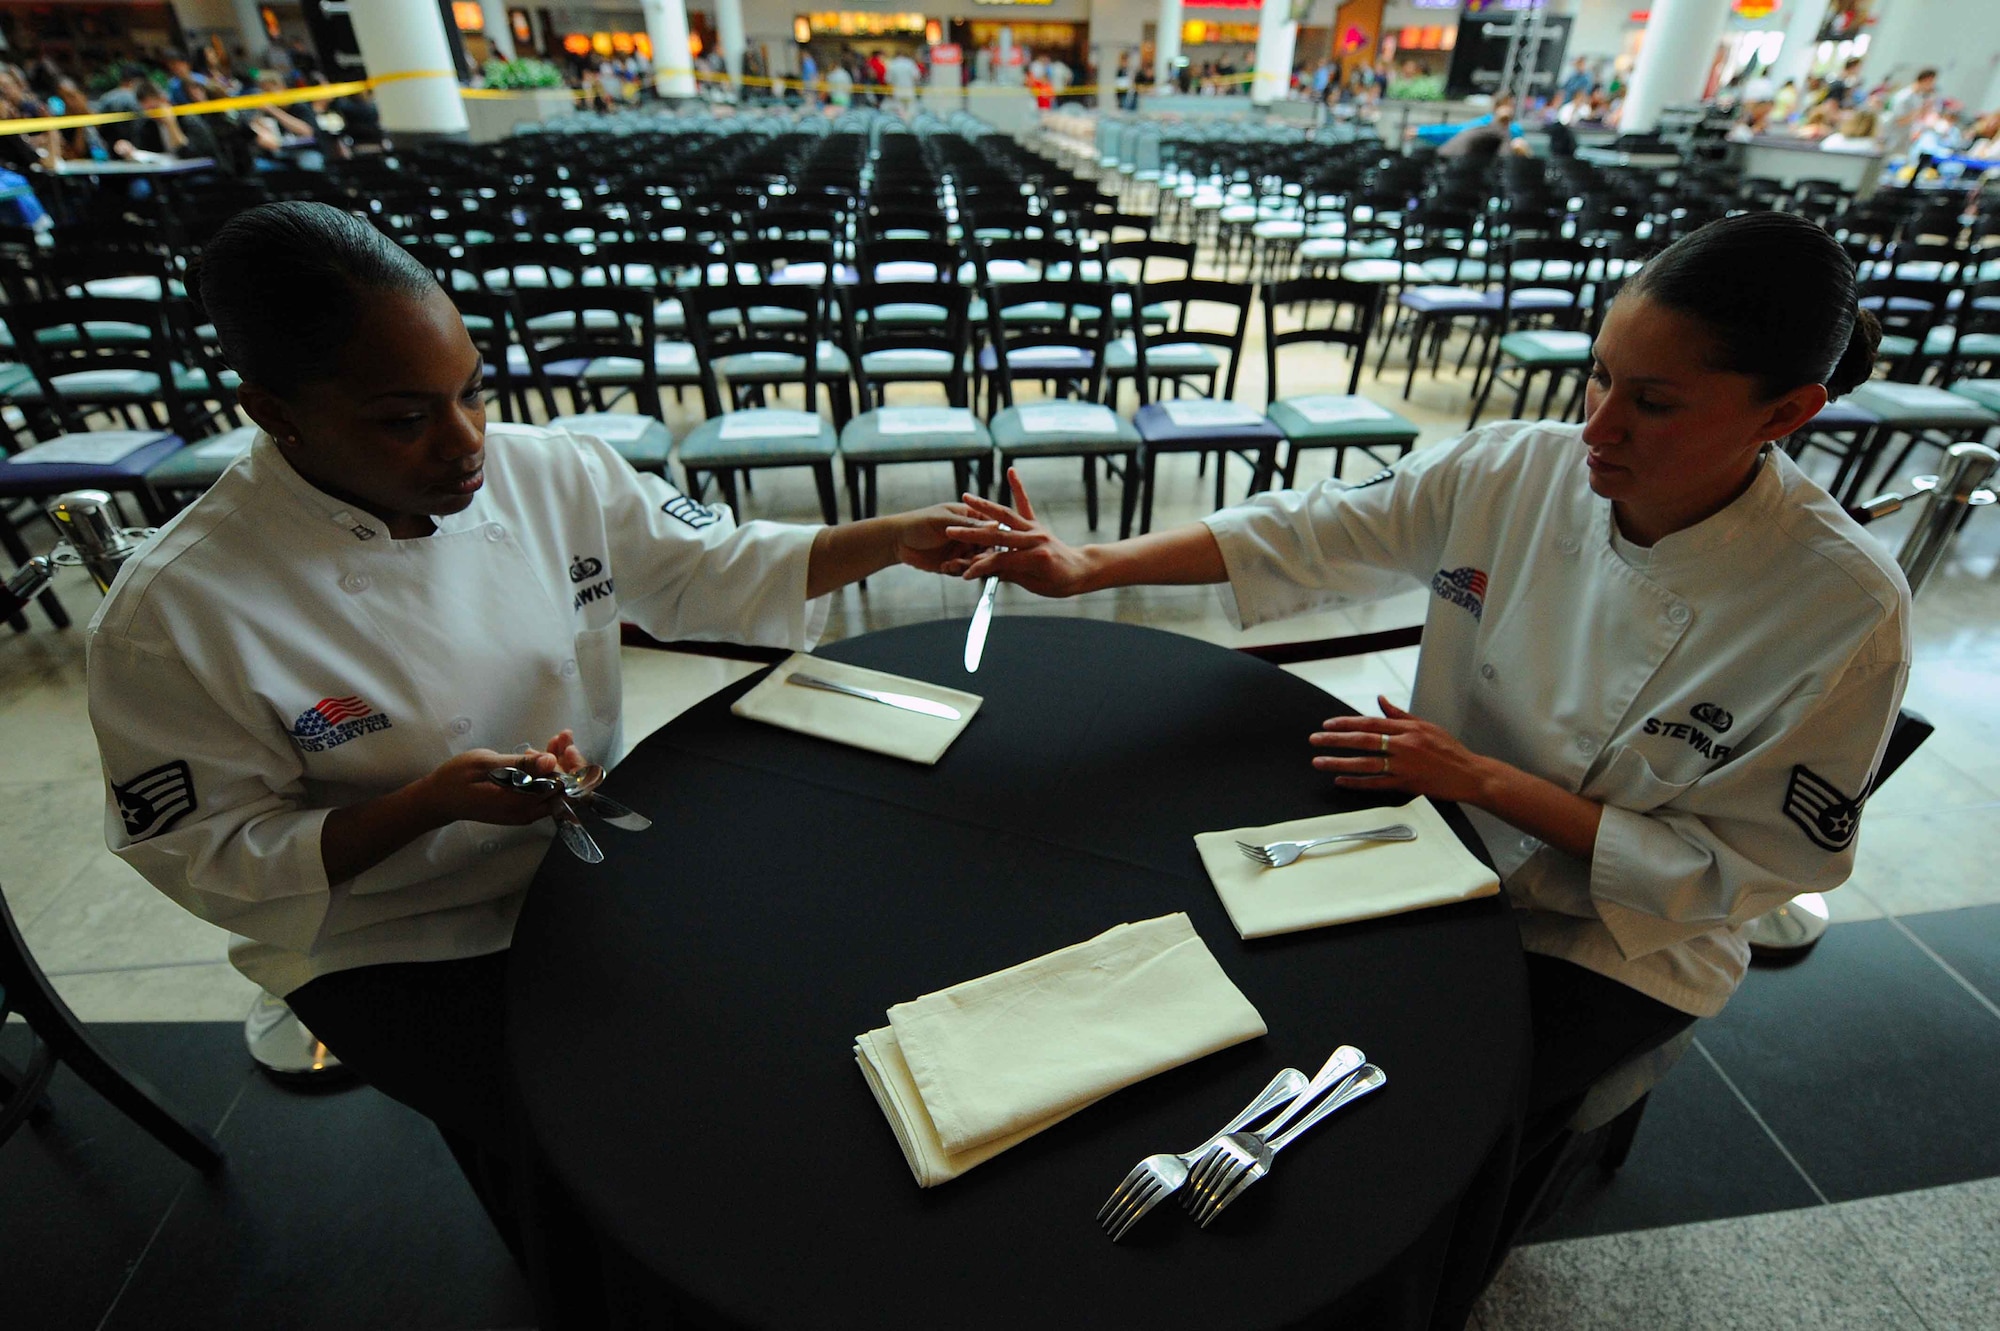 U.S. Air Force Staff Sgt's. Vilynthia Hawkins and Sheryl Stewart, 86th Services Squadron chef services specialists, prepare table settings for VIP guests prior to the Chef Emeril Lagasse cooking demonstration at the Kaiserslautern Military Community Center, Ramstein Air Base, Germany, May 29, 2010. Celebrity Chef Emeril Lagasse visited the KMCC to promote his new book along with providing a book signing and a full production cooking exhibition copies of his new book and performing an hour long cooking demonstration for over a thousand visitors. (U.S. Air Force photo by Staff Sgt. Stephen J. Otero)